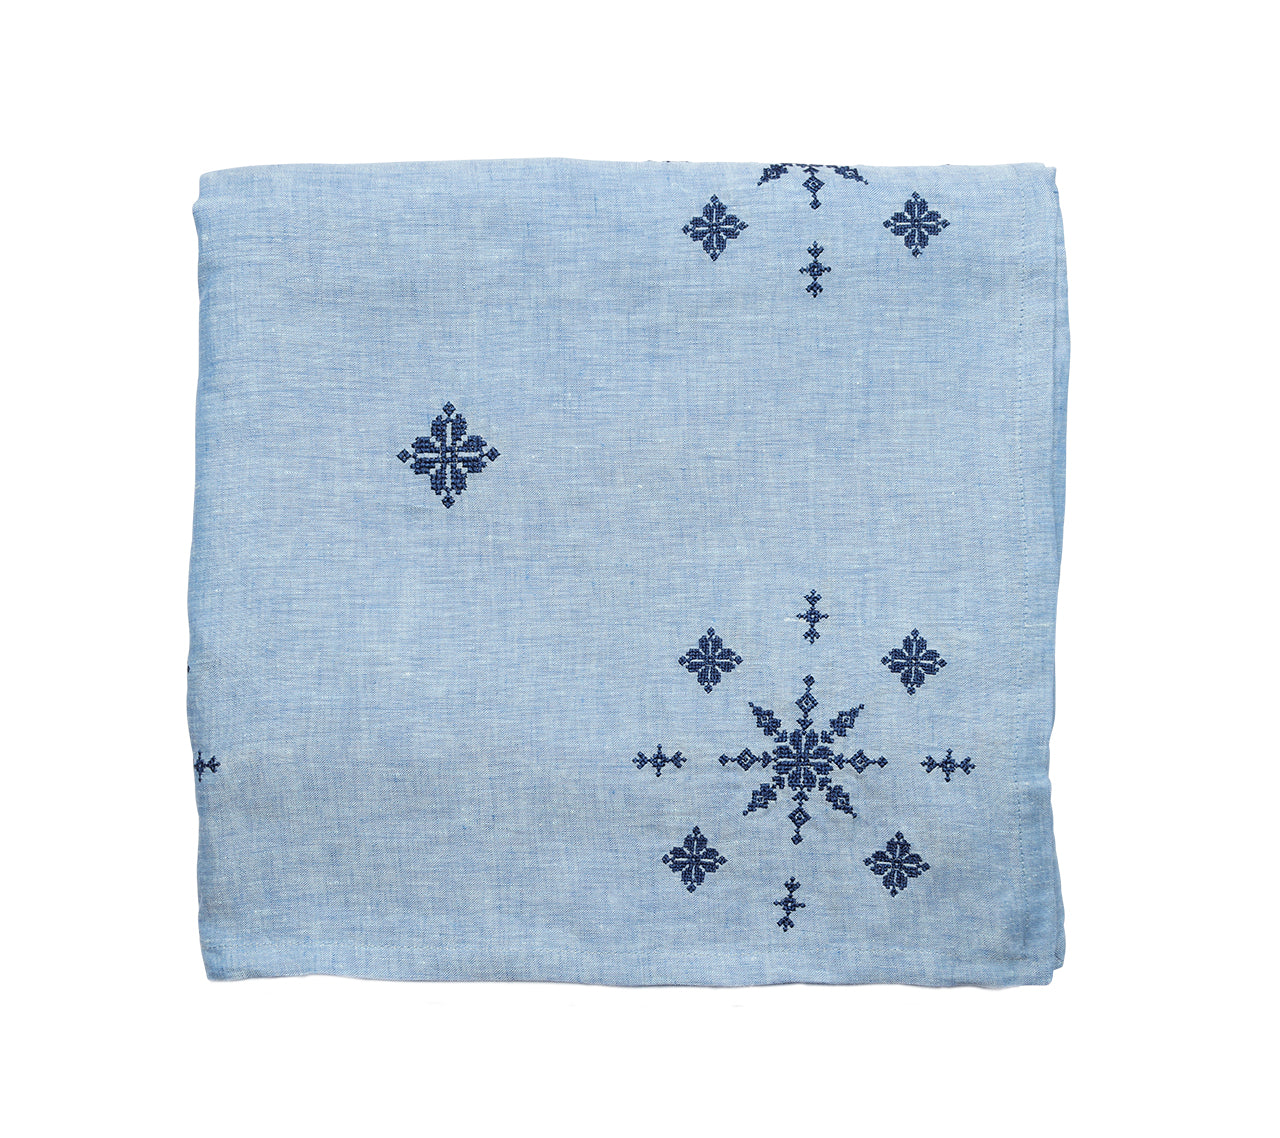 Fez Tablecloth in periwinkle & navy, folded